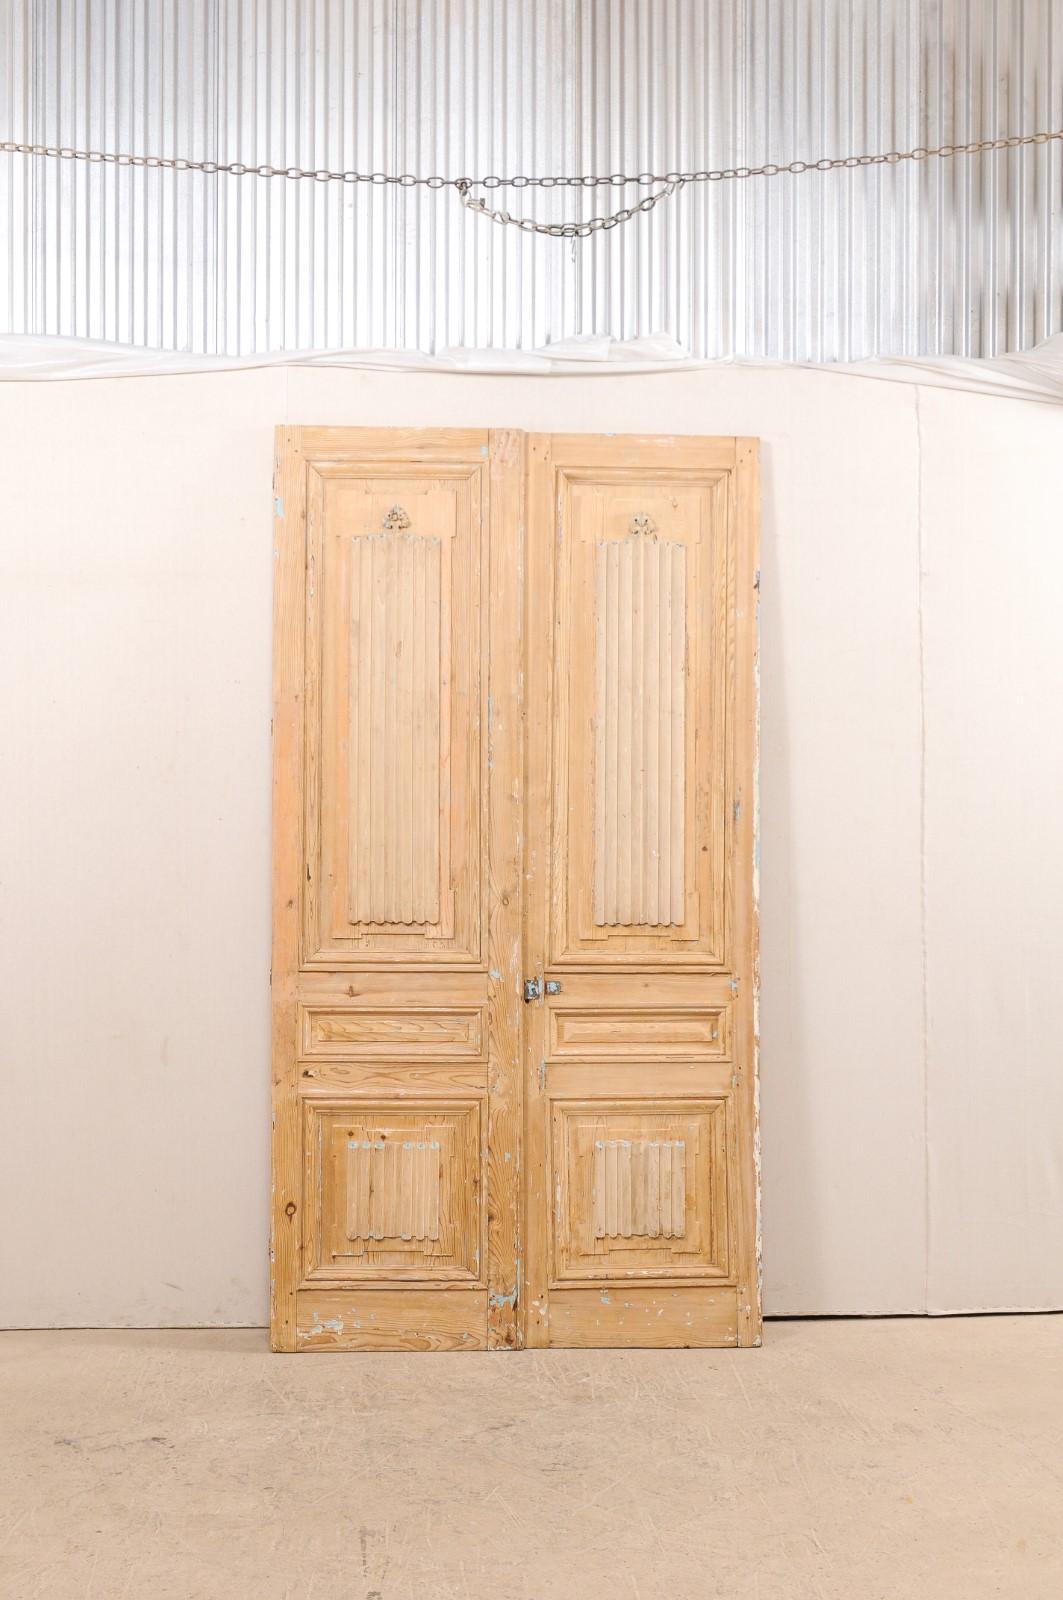 A beautiful pair of French linenfold carved doors from the 19th century. This pair of French three-panel doors each feature a sweetly carved linenfold design at upper and lower panels, with back-sides being adorn in more of a geometric pattern